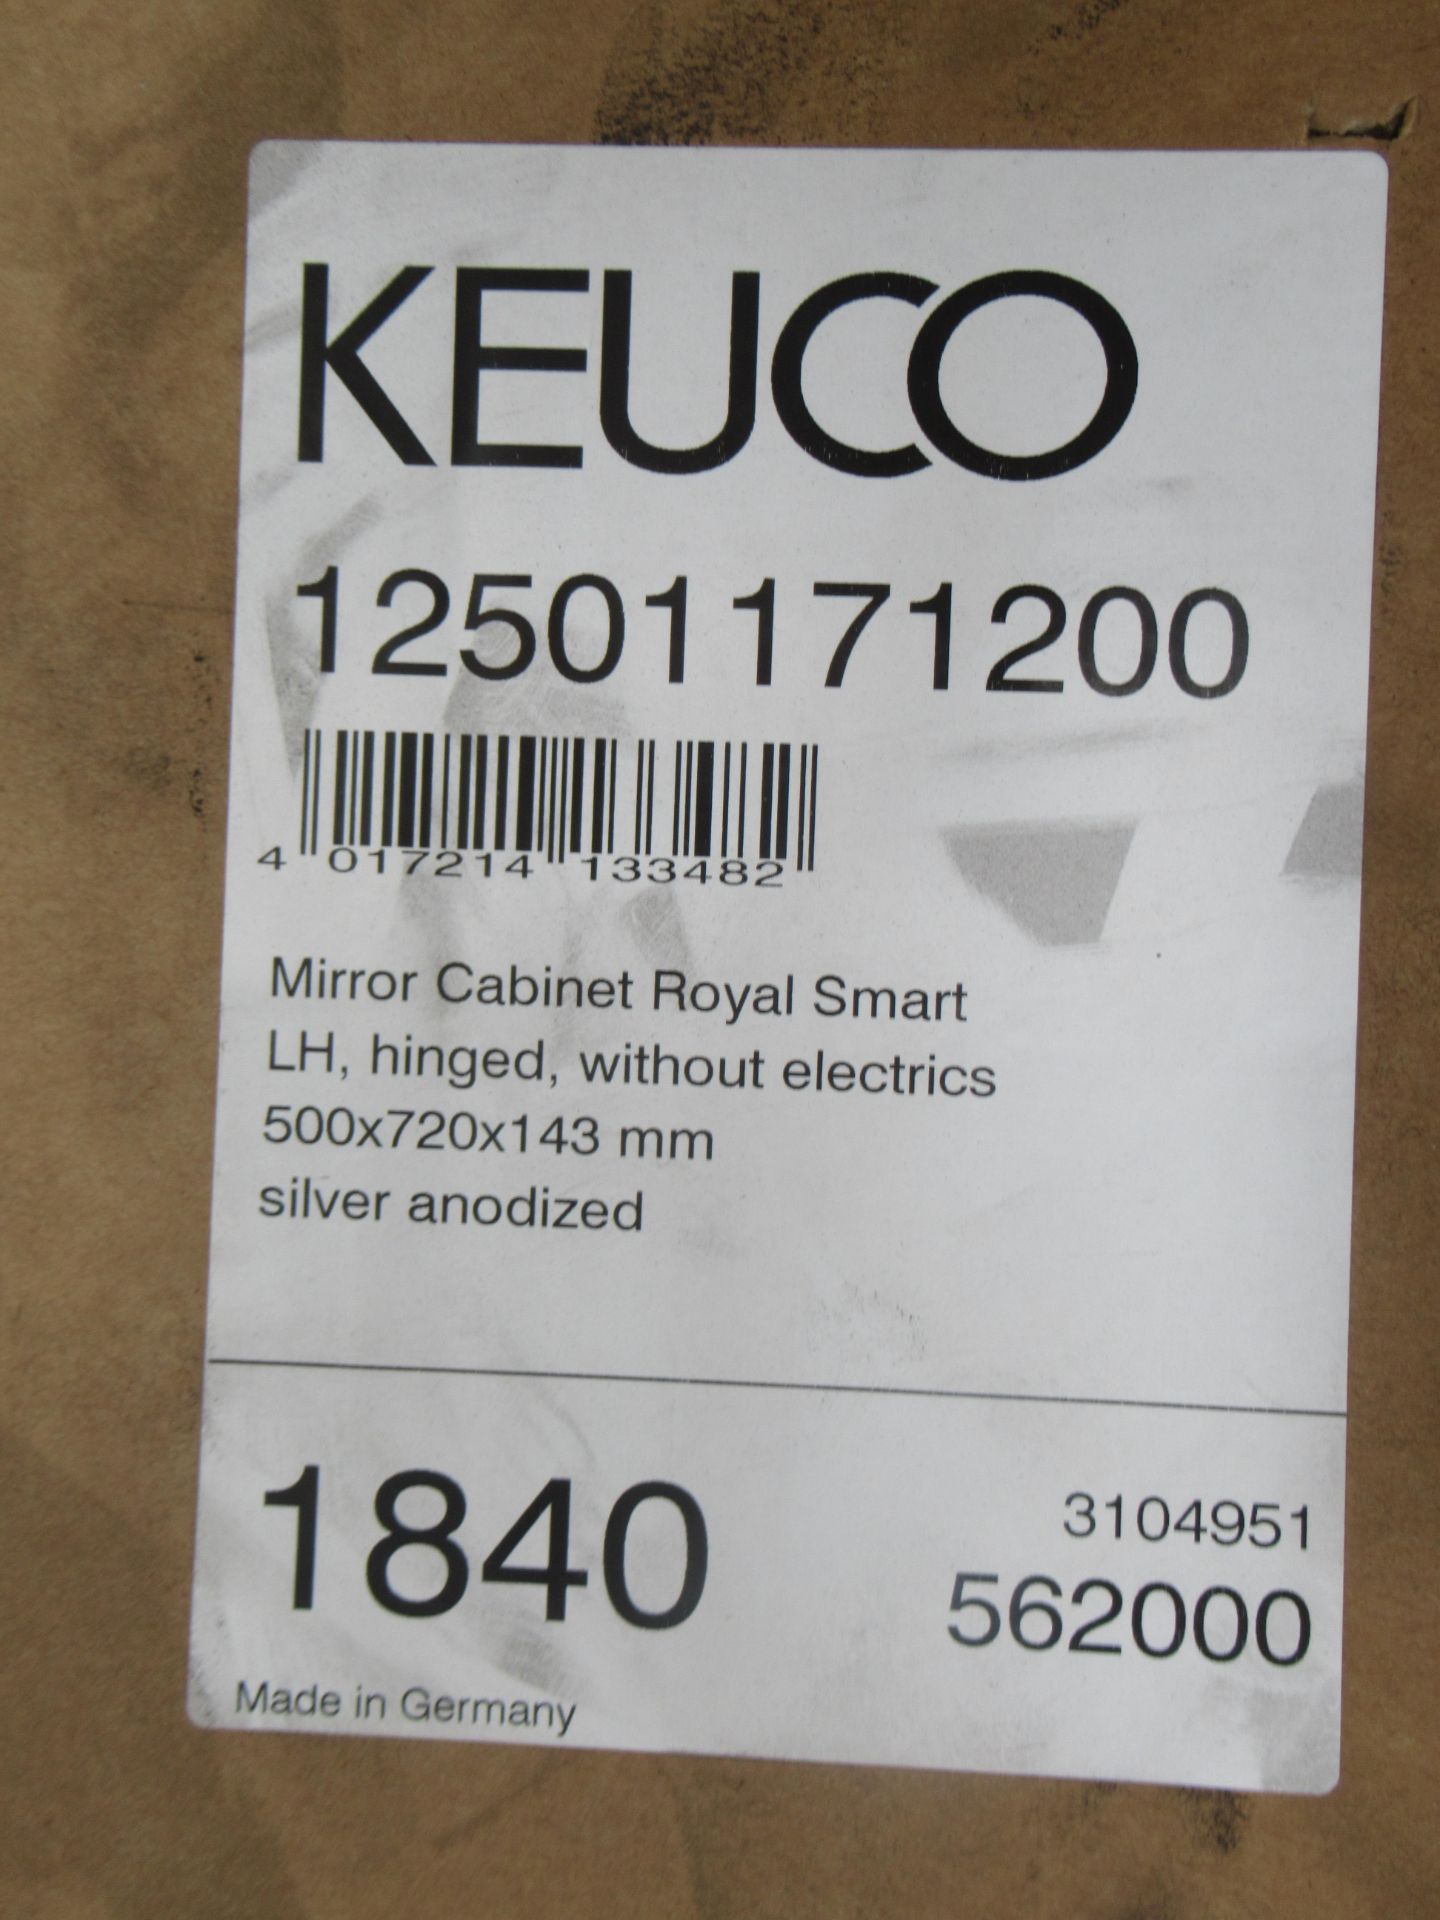 Keuco Royal 30 Mirror Cabinet Royal Smart, LH, Without Electricals - Image 2 of 4